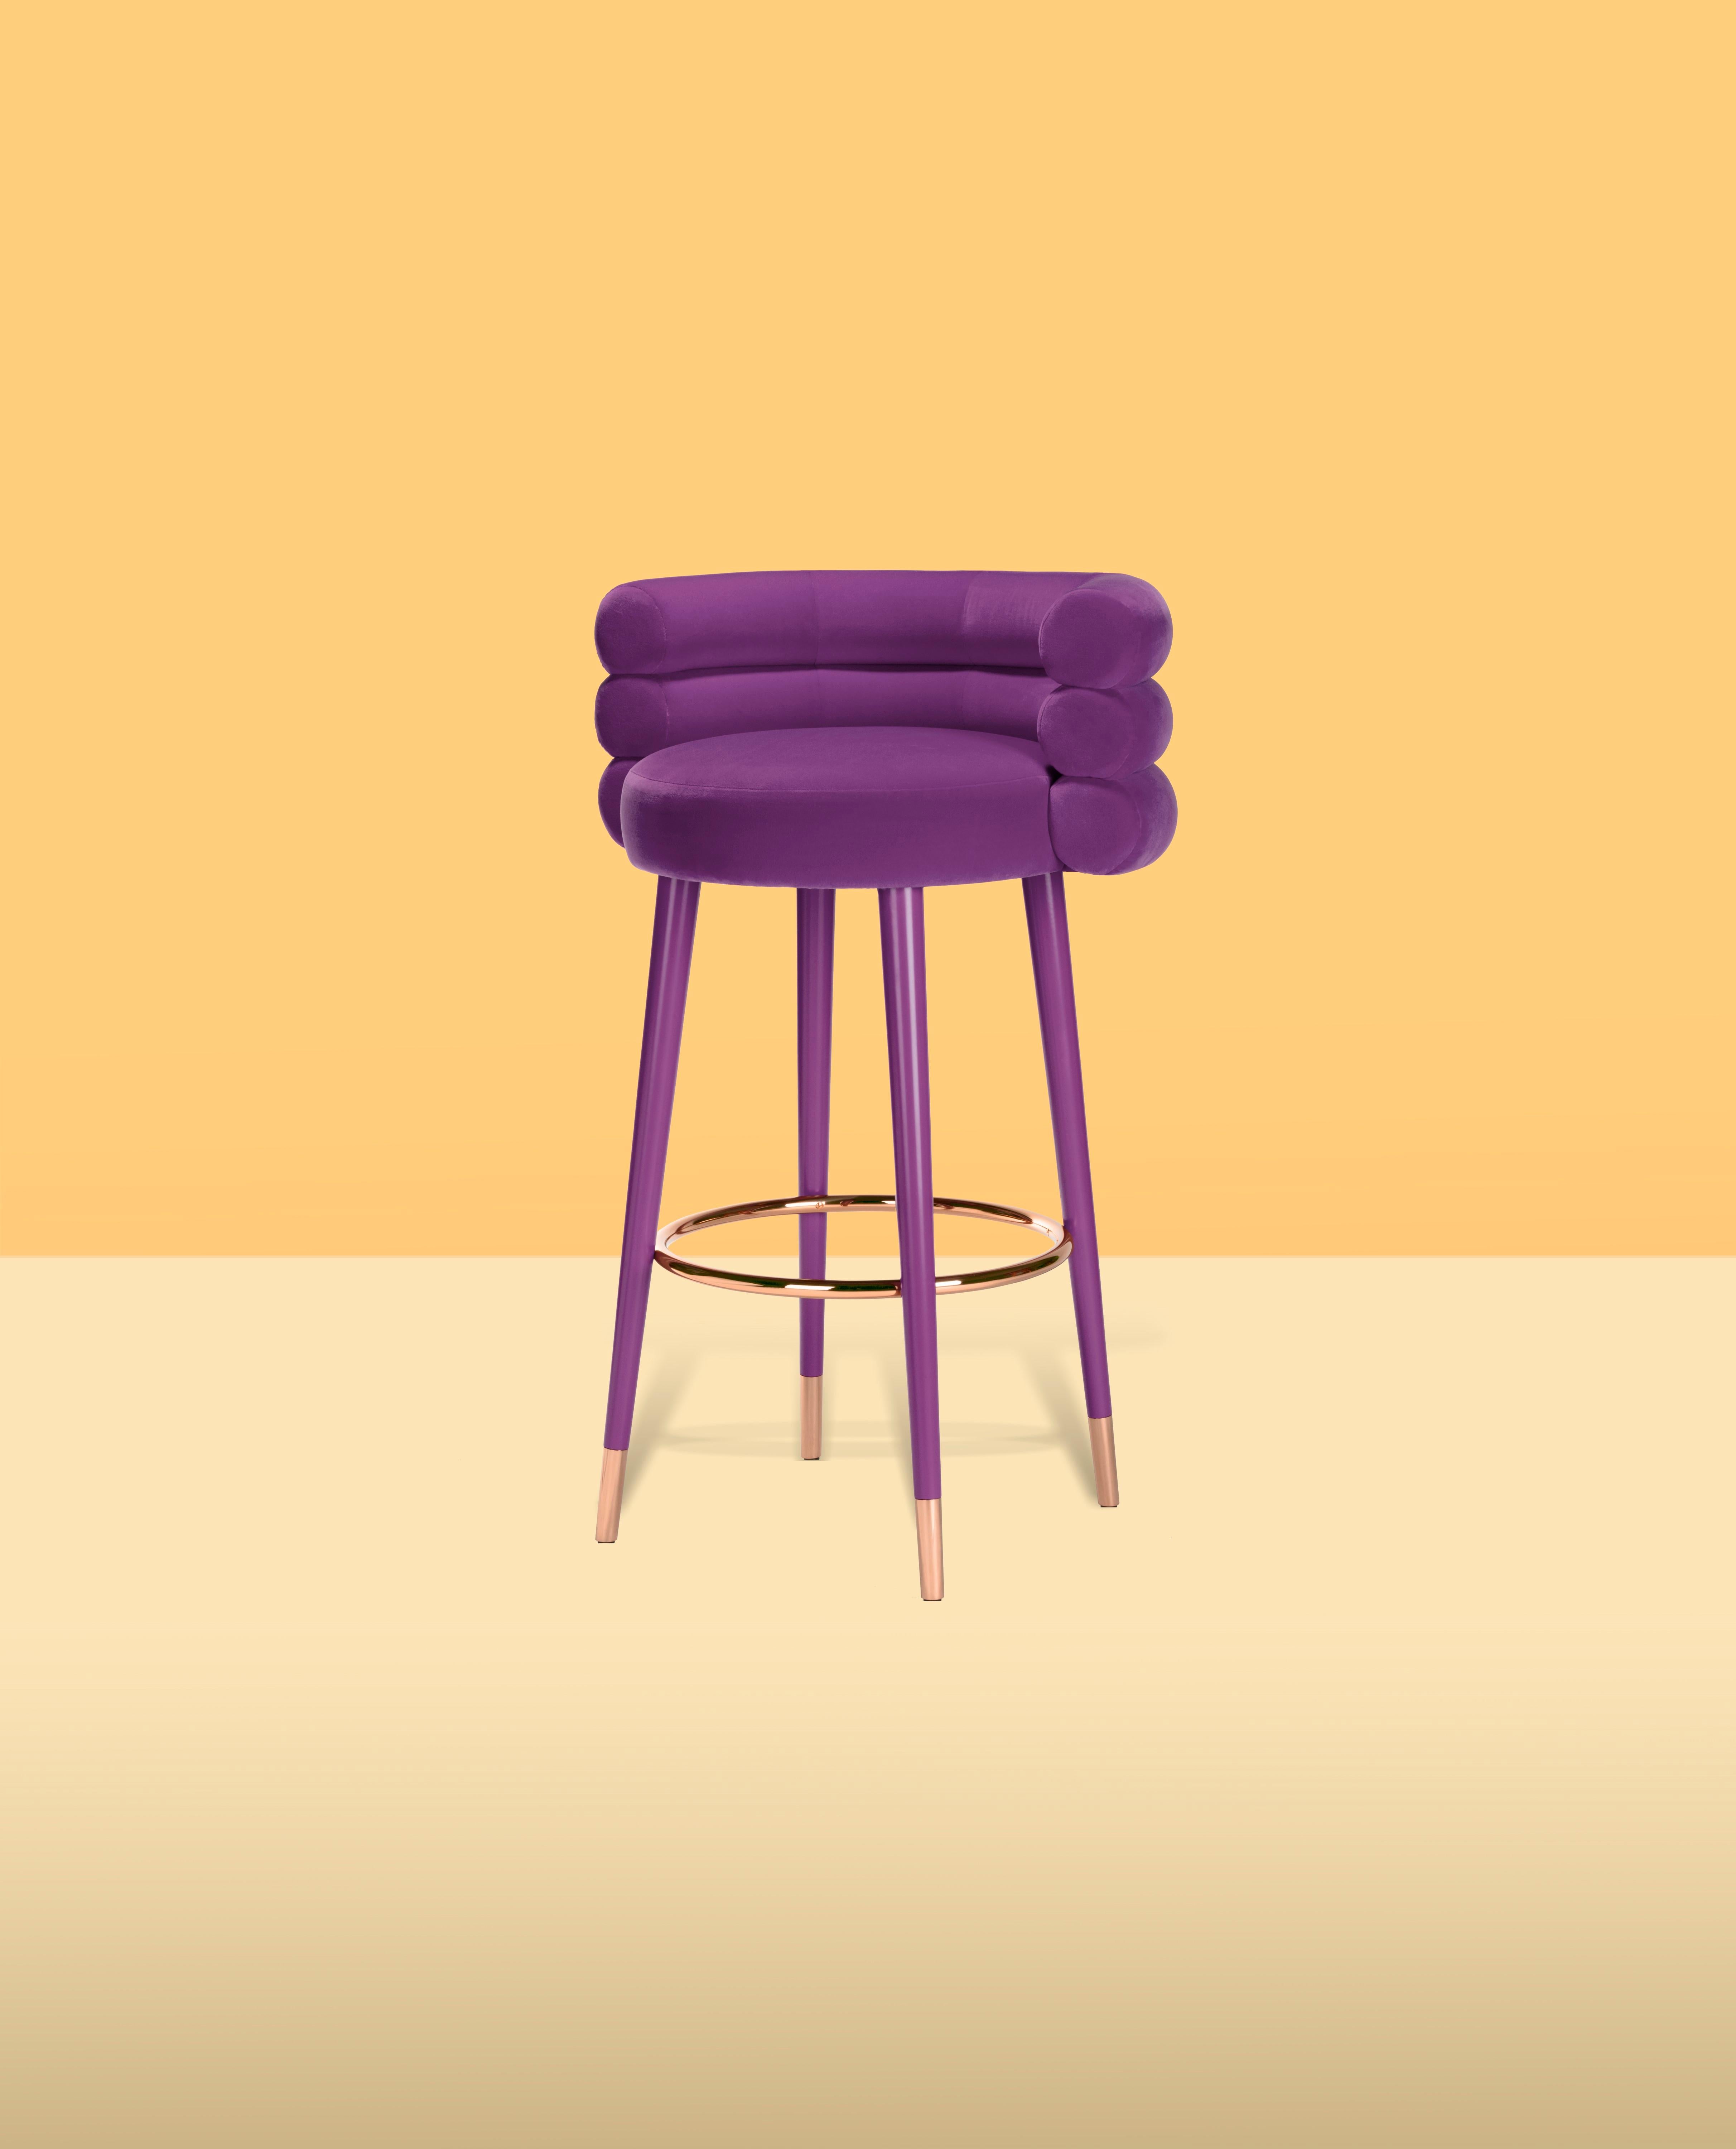 Marshmallow bar stool, Royal stranger
Dimensions: 100 x 70 x 60 cm
Materials: Velvet upholstery, brass
Available in: Mint green, light pink, Royal green and Royal red

Royal stranger is an exclusive furniture brand determined to bring you the